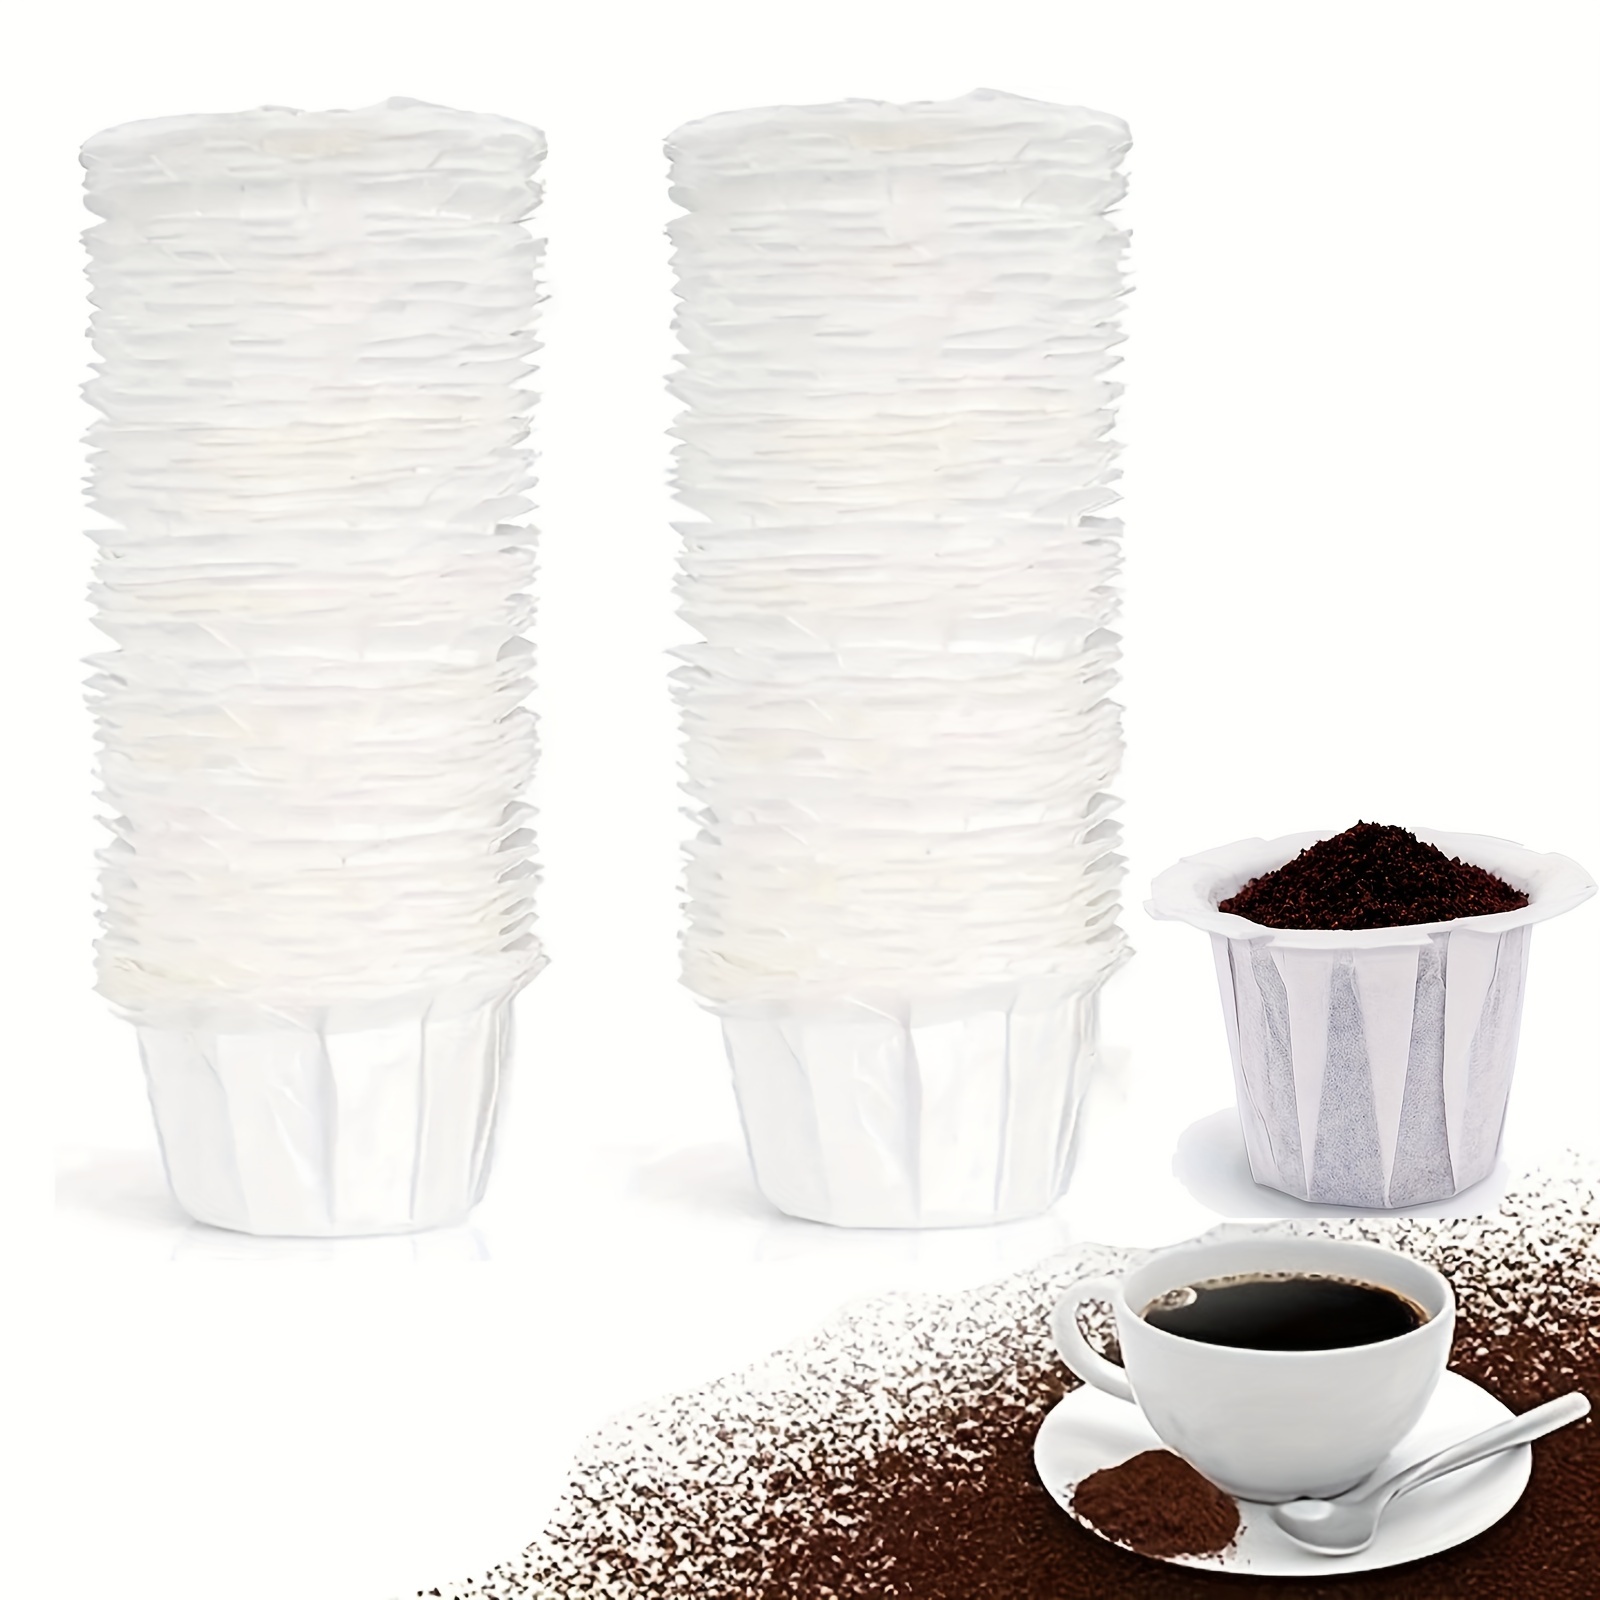 

100pcs, Disposable Coffee Filters, Counts Coffee Filter Paper For Keurig Brewers Single Serve 1.0 And 2.0, Compatible With Reusable K Cup Filter, White